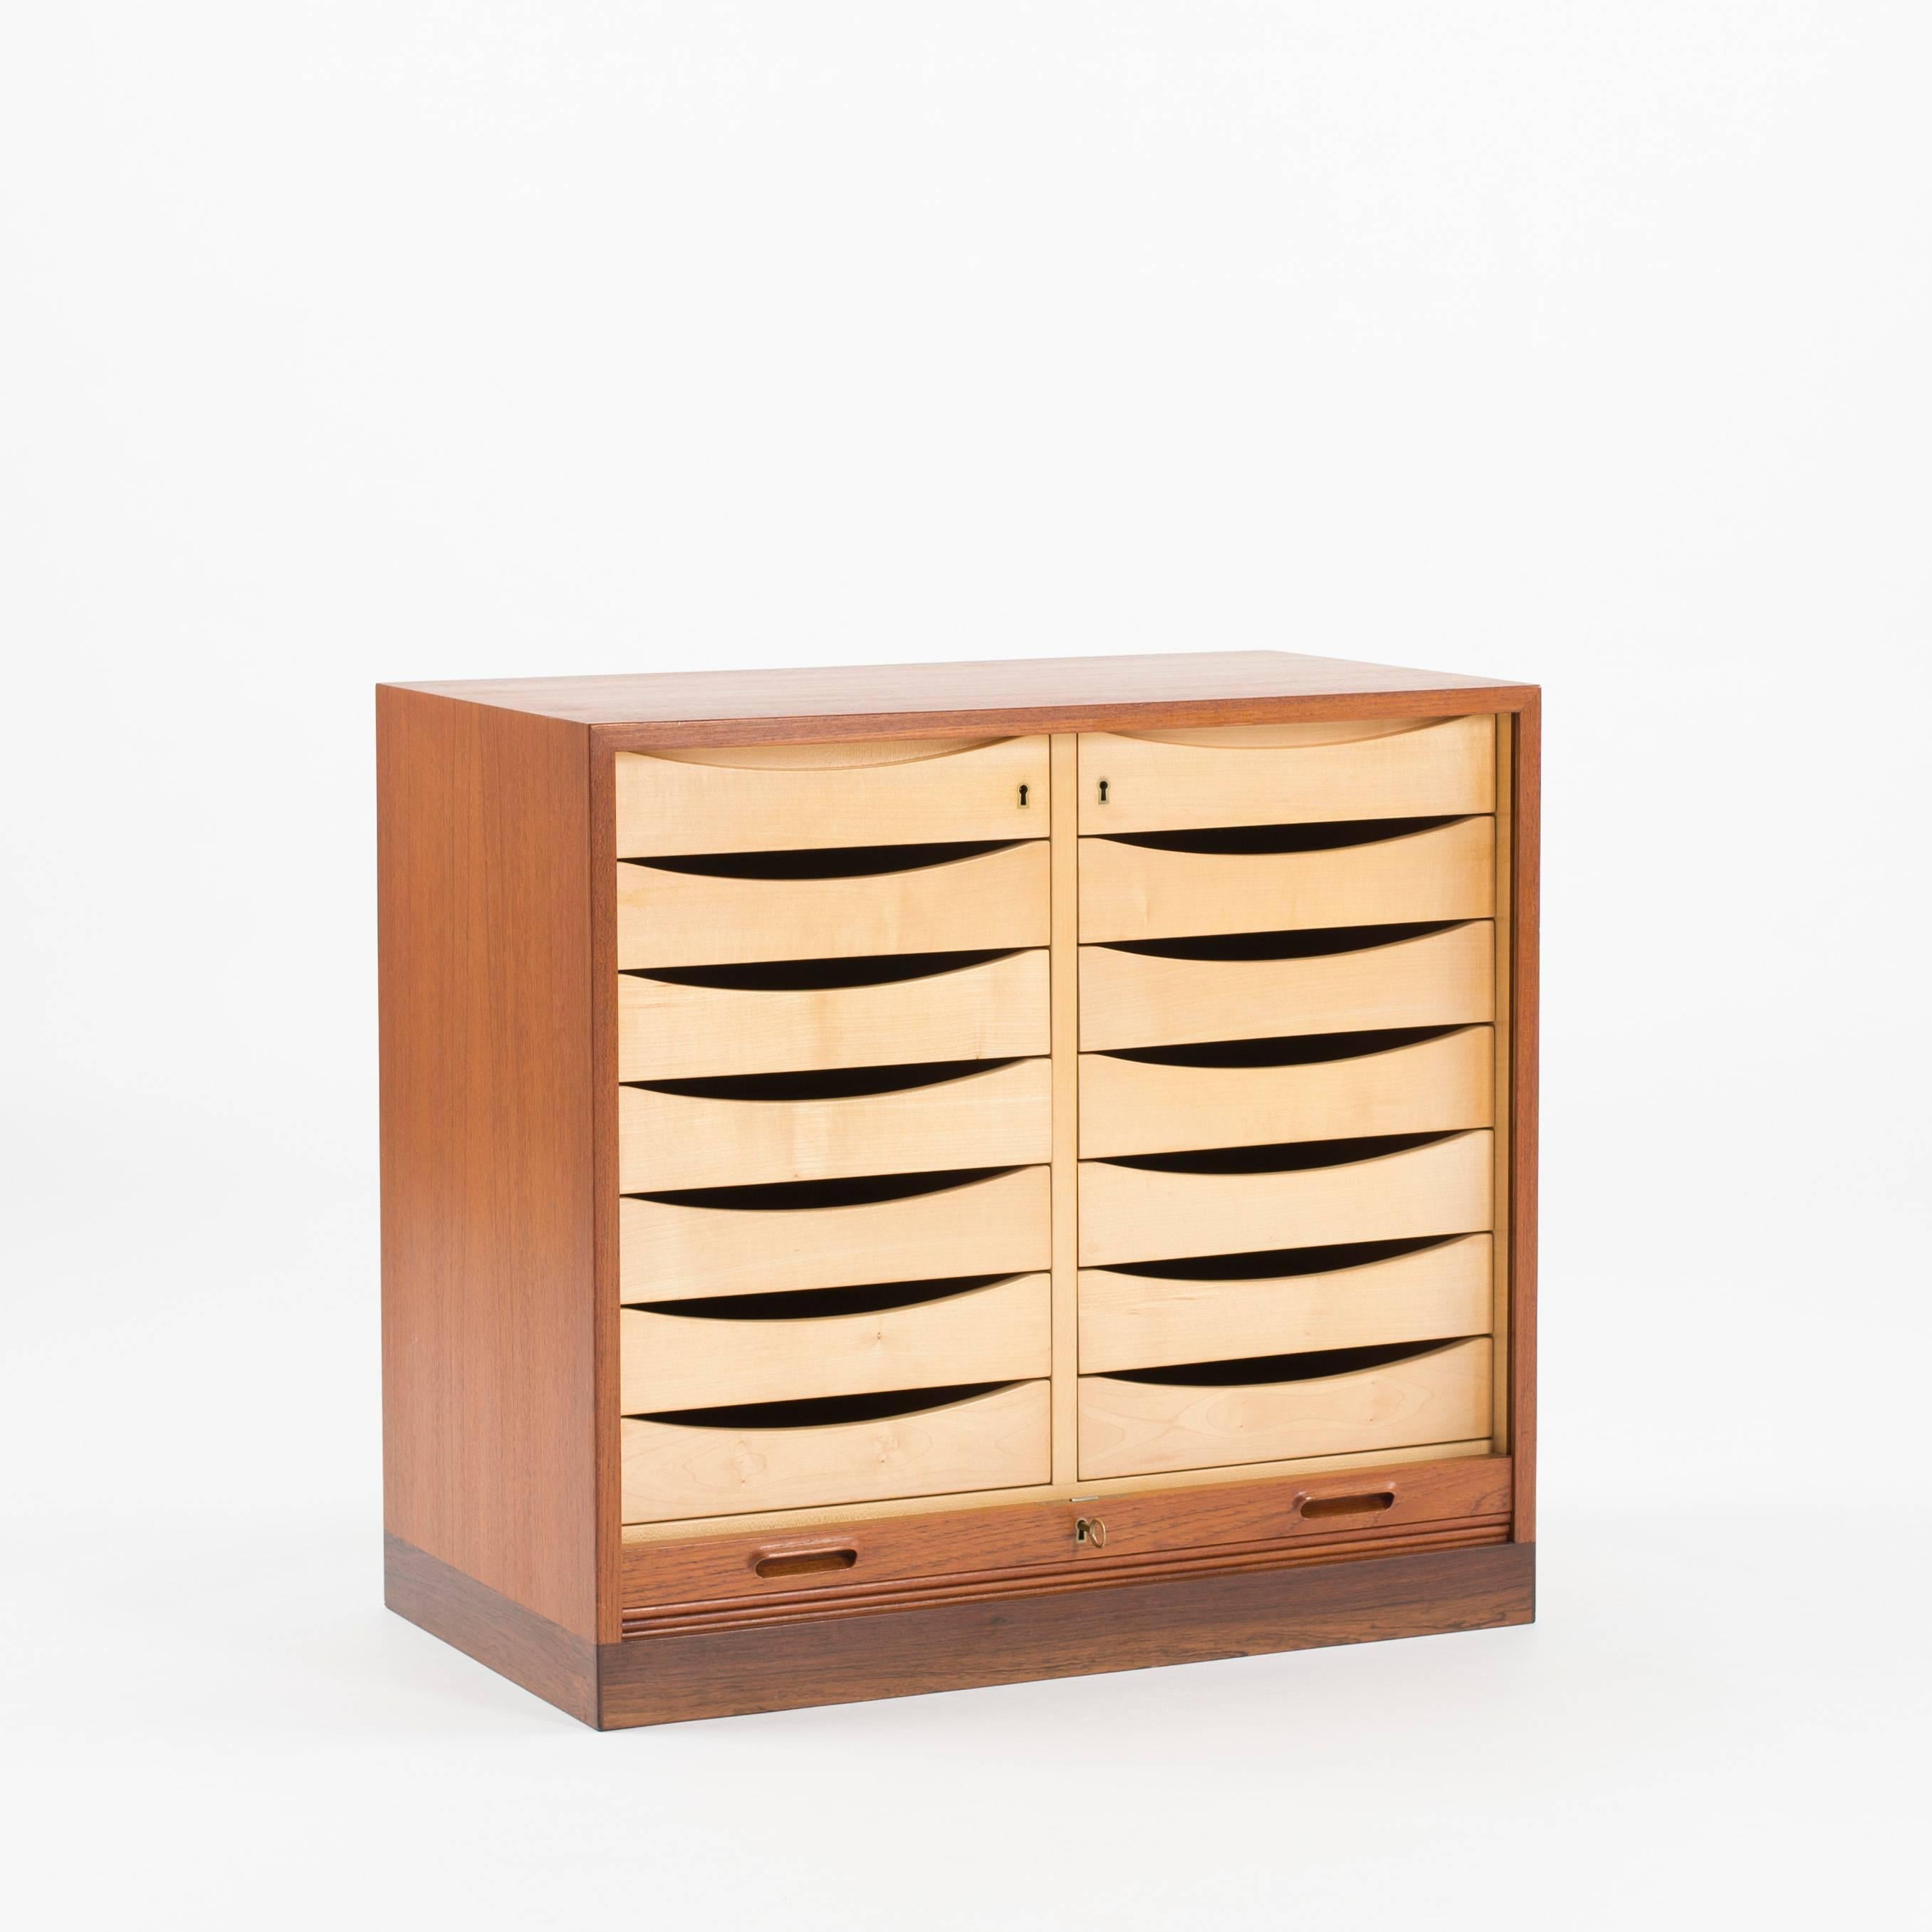 Cabinet with drawers by Ejner Larsen and Aksel Bender Madsen. Executed by Willy Beck, Copenhagen, Denmark.

Teak, Rosewood and Maple.